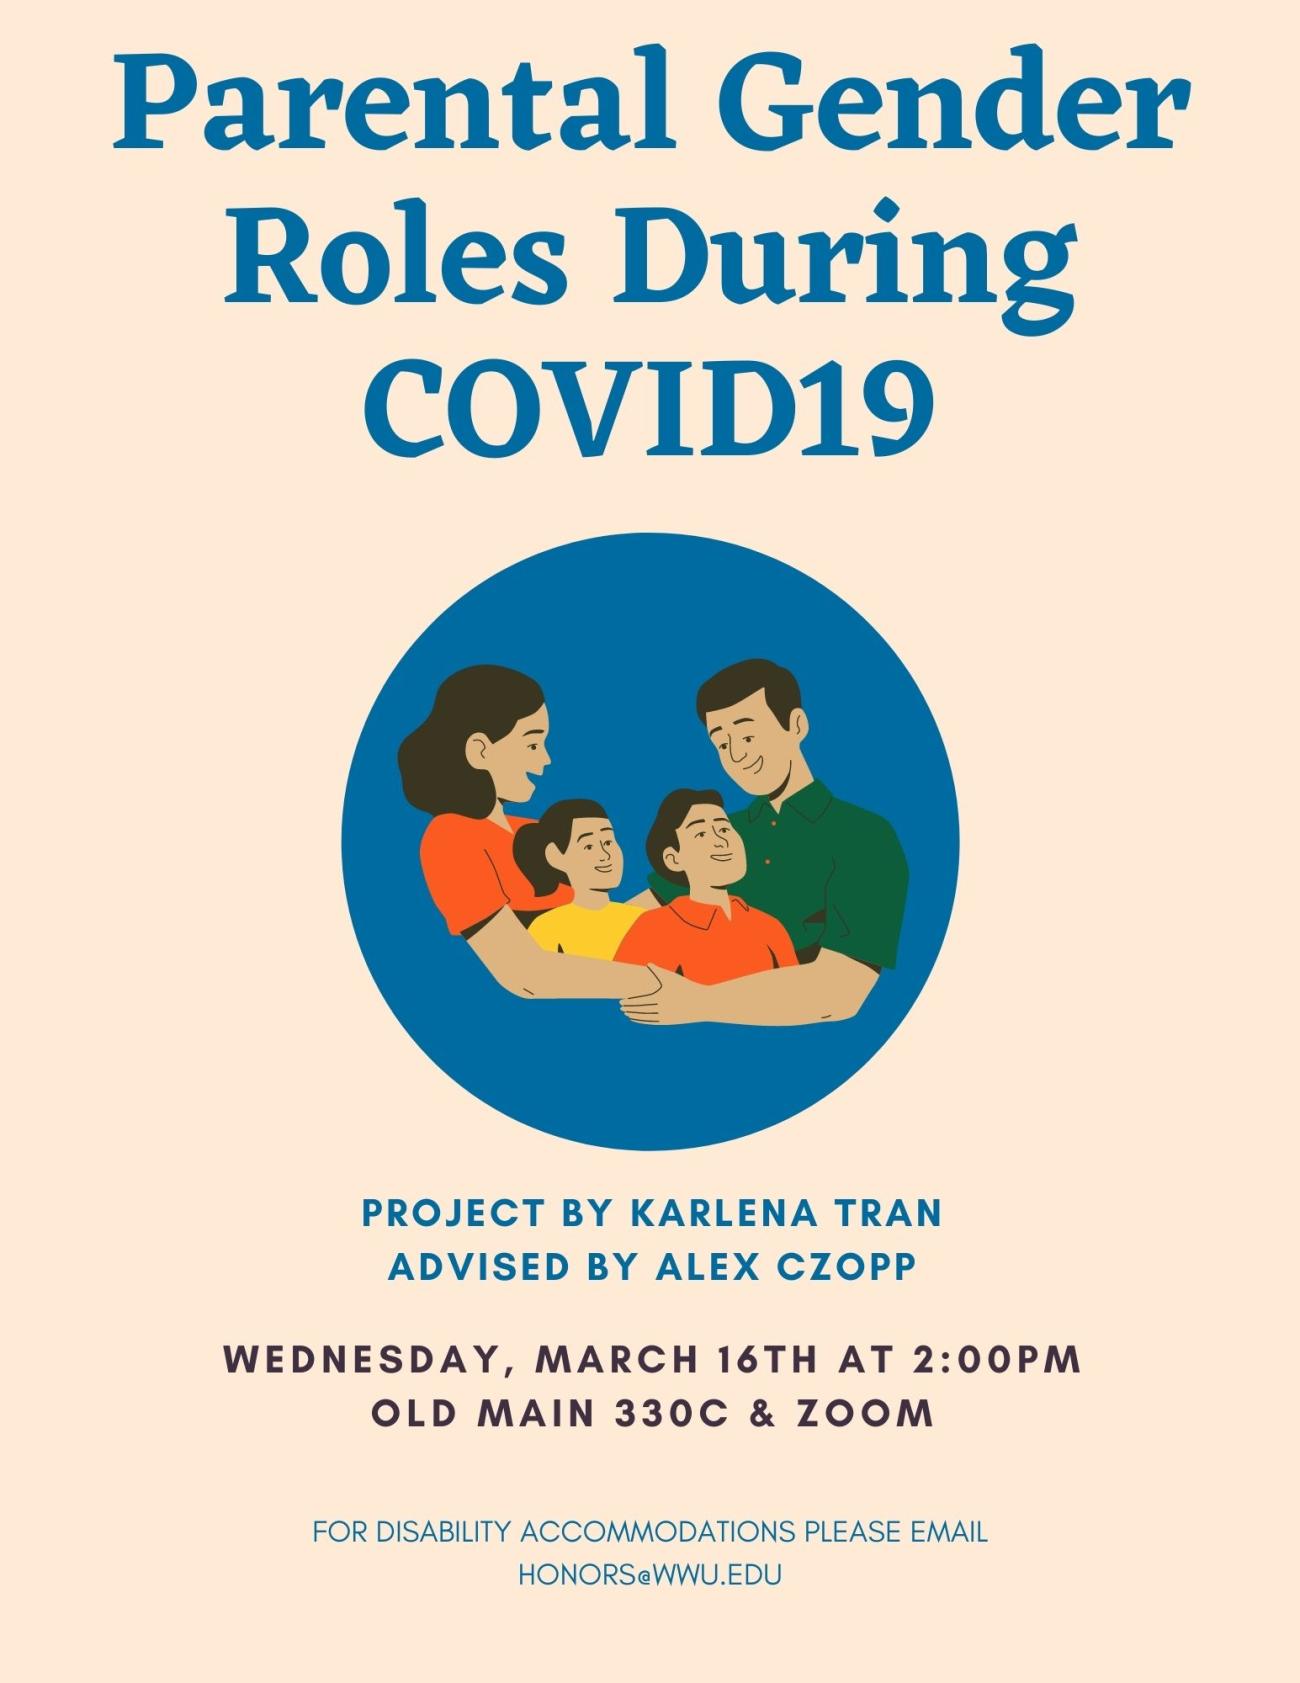 A tan poster with a drawing of a family with a mom, dad, and two kids. The text reads: "Parental Gender Roles During COVID-19. Project by Karlena Tran, Advised by Alex Czopp. Wednesday, March 16th at 2:00 PM. Old Main 330C and Zoom. For disability accommodations, please email honors@wwu.edu"